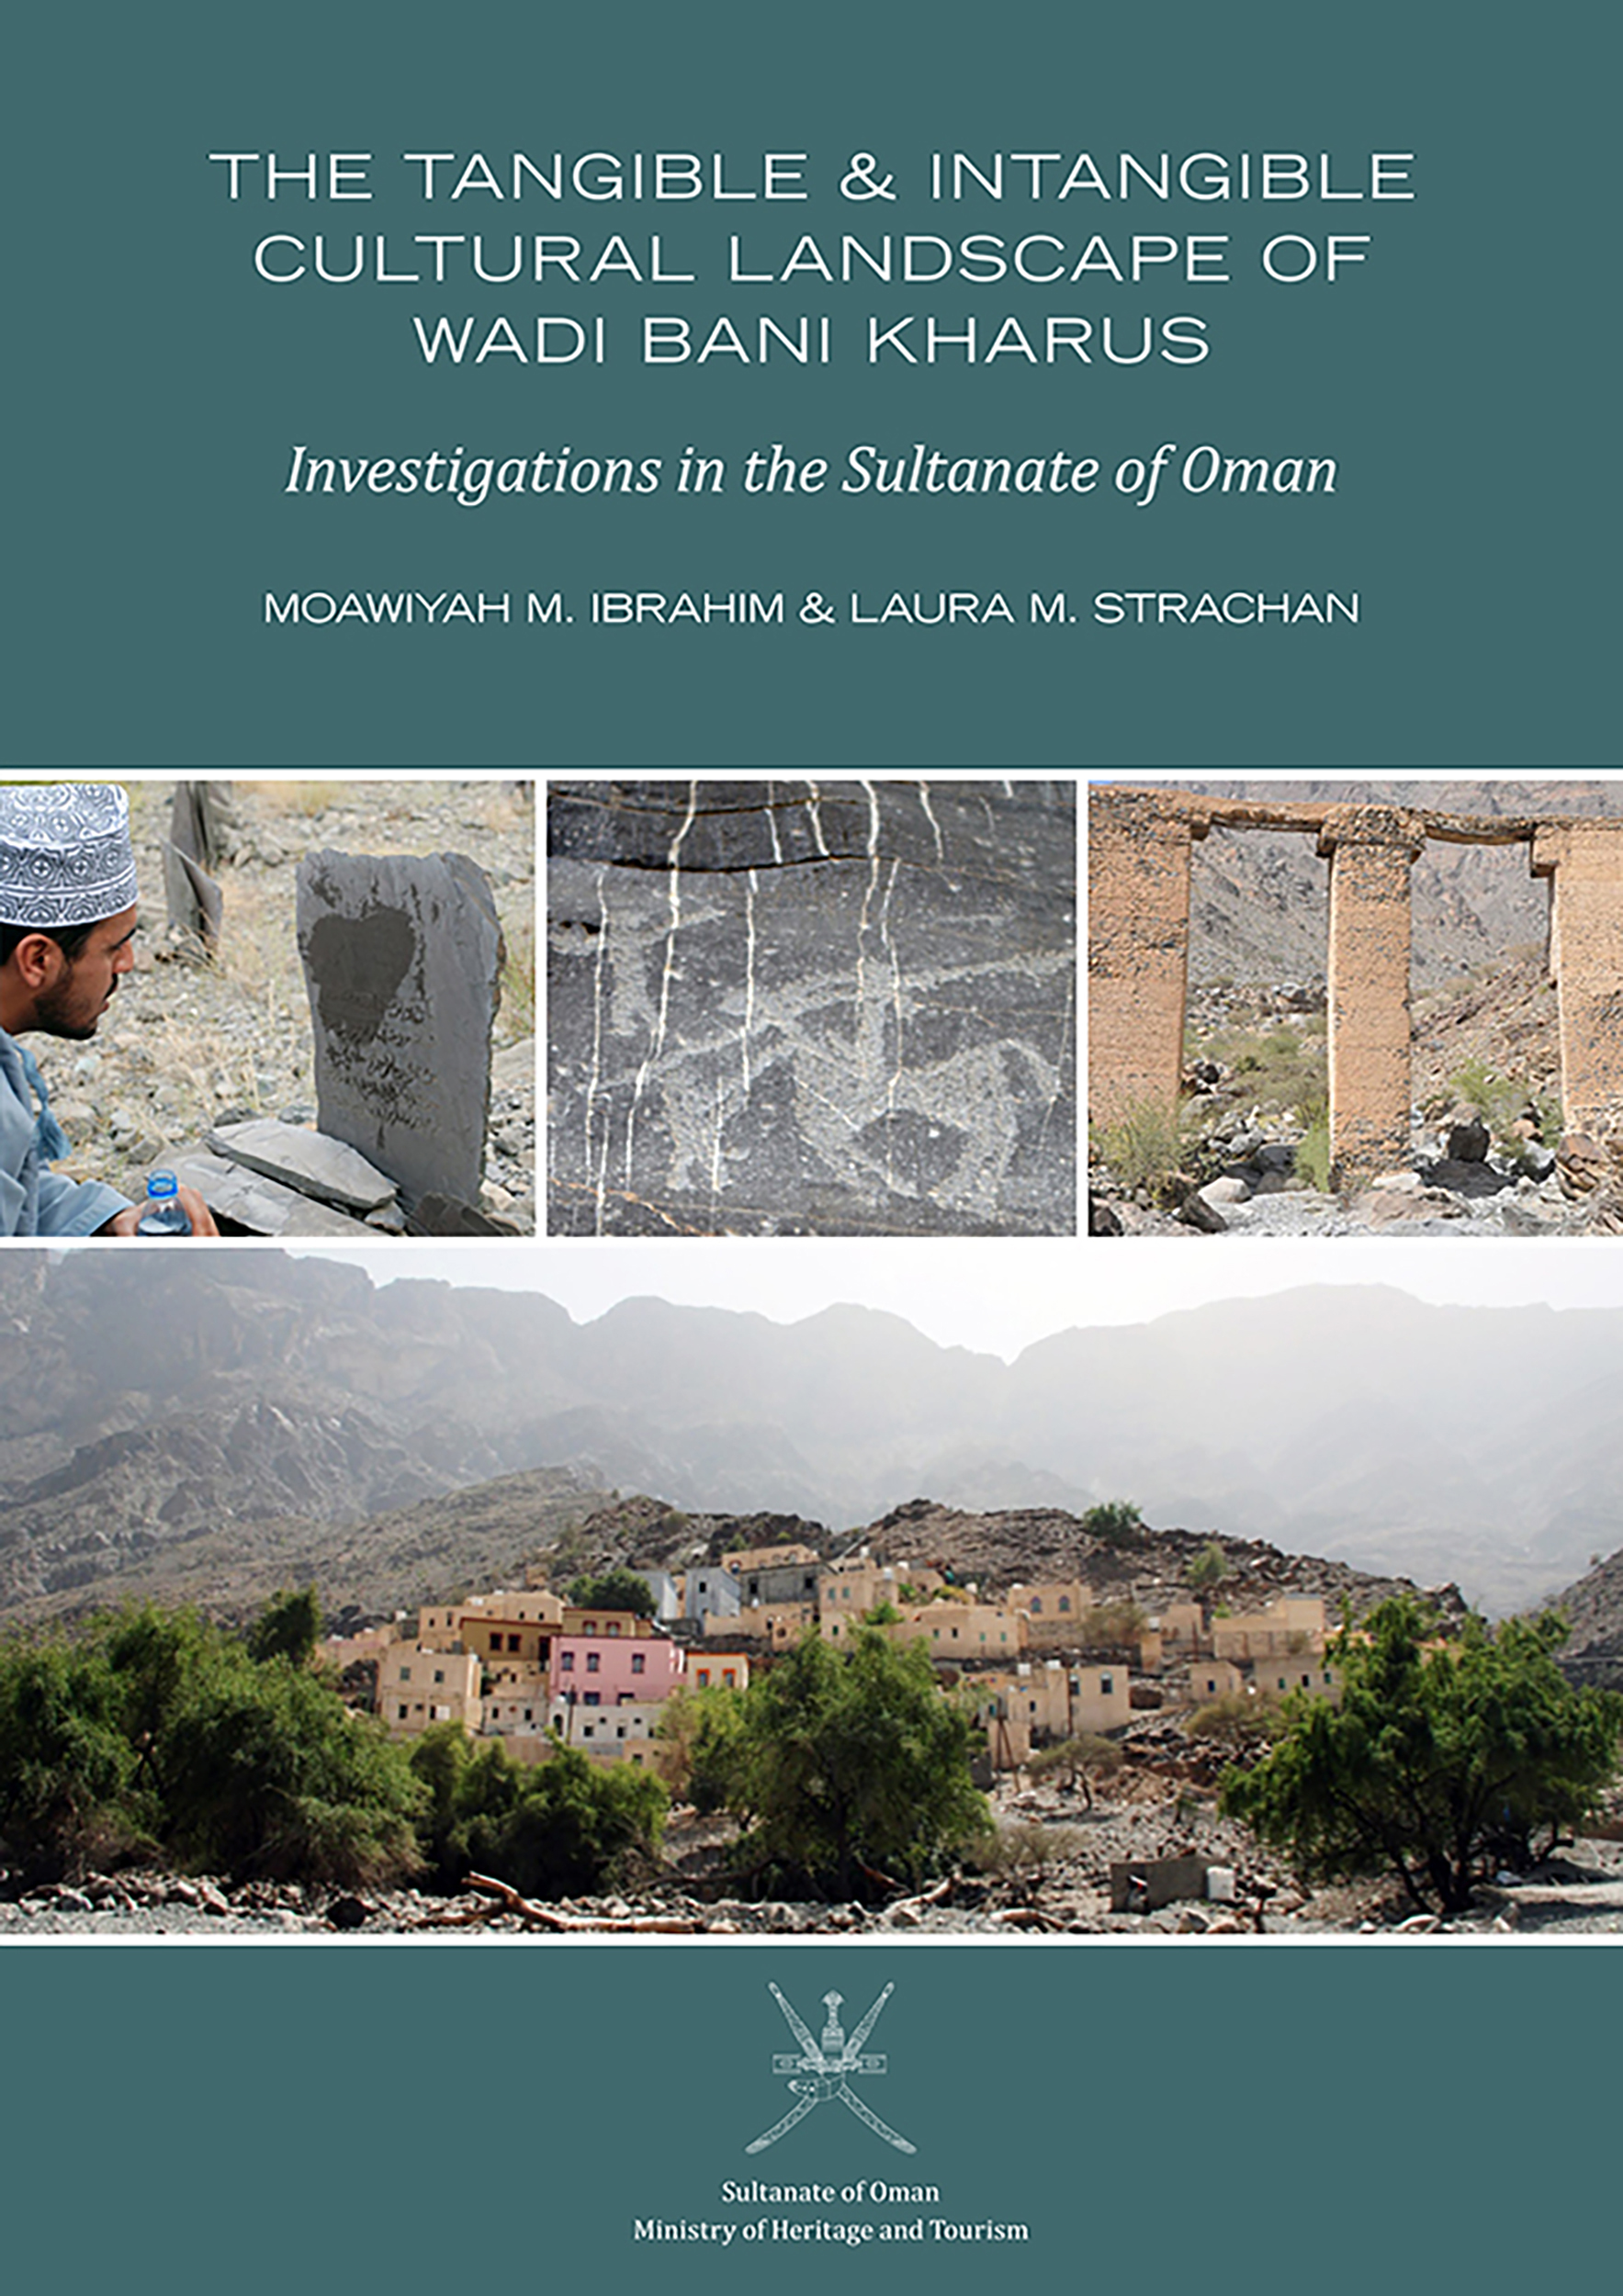 The Tangible & Intangible Cultural Landscape of Wadi Bani Kharus: Investigations in the Sultanate of Oman 